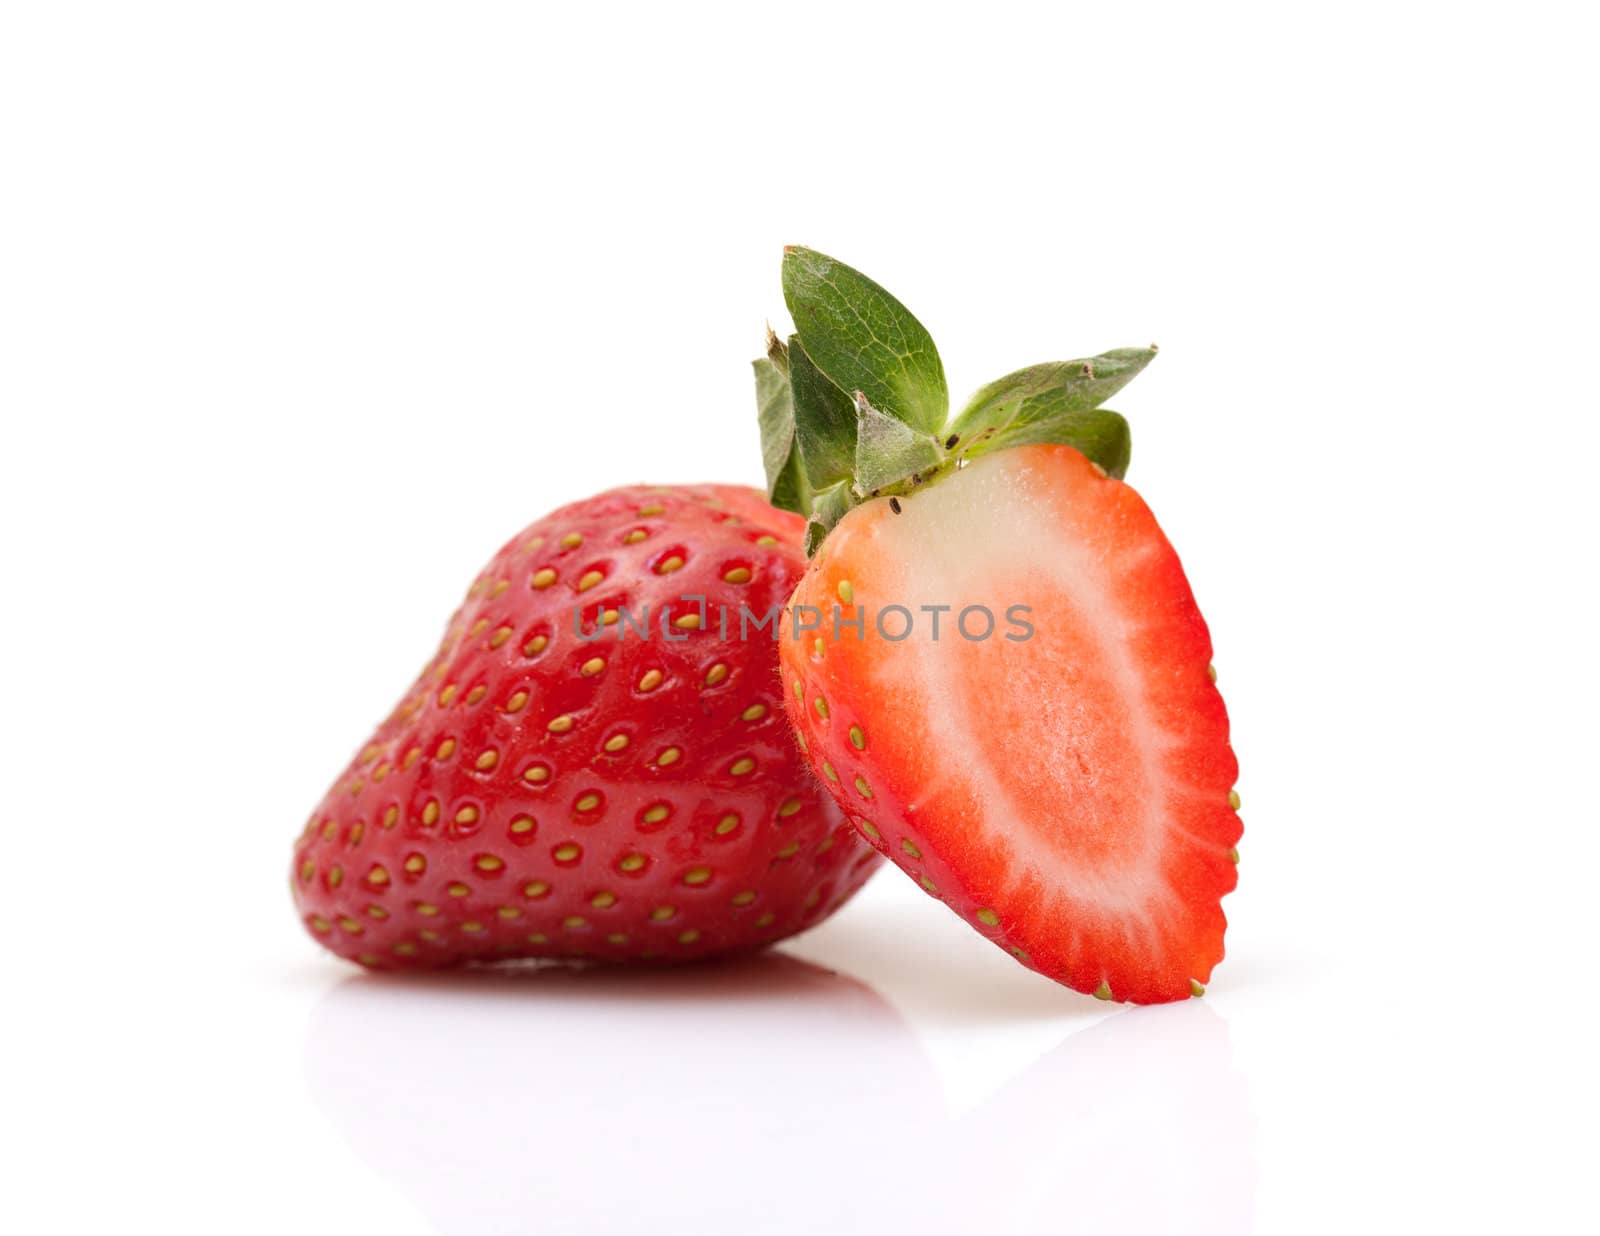 Strawberries closeup over white background